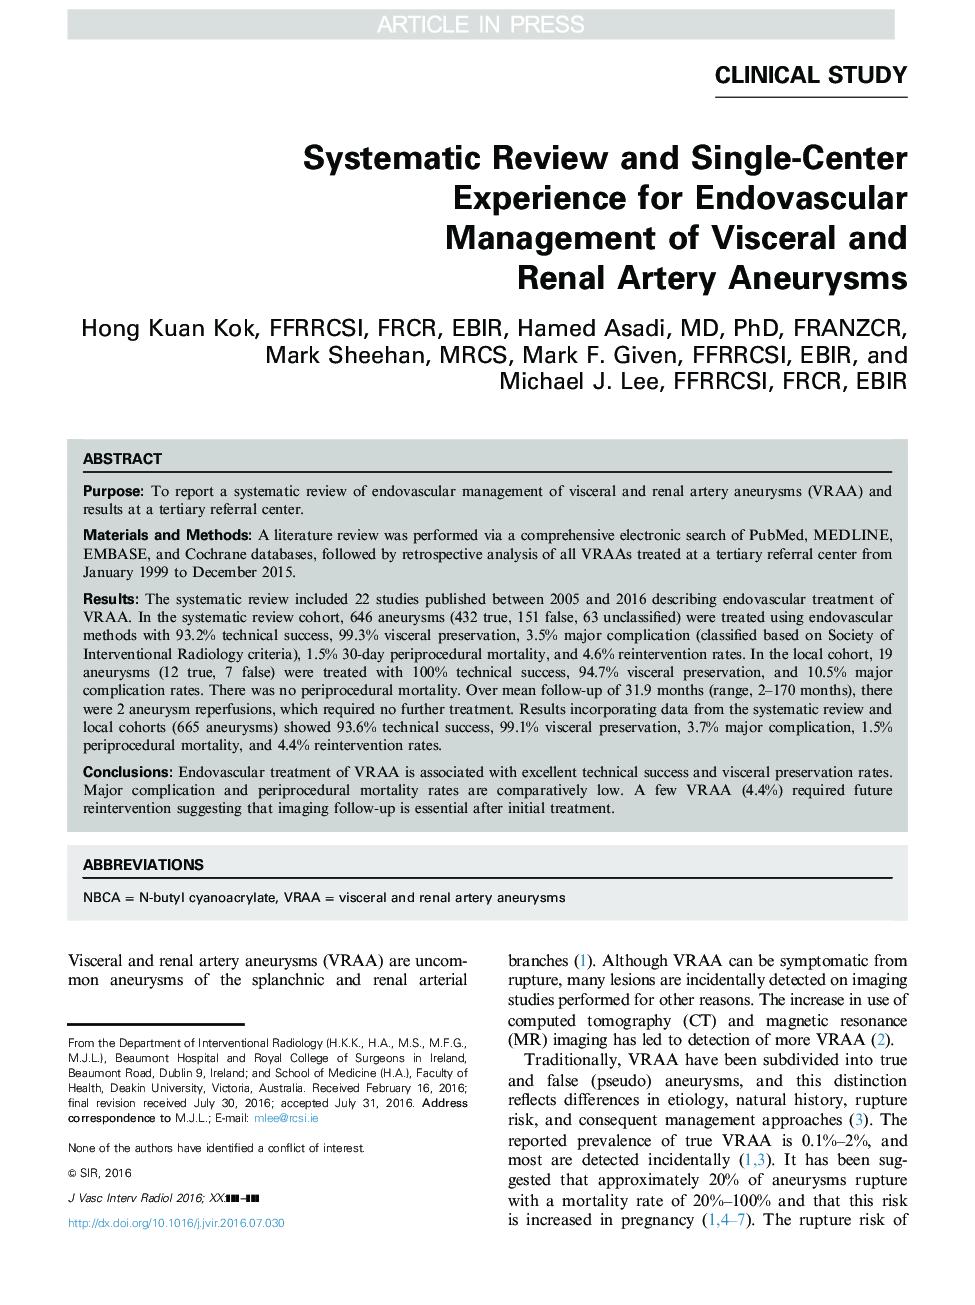 Systematic Review and Single-Center Experience for Endovascular Management of Visceral and Renal Artery Aneurysms